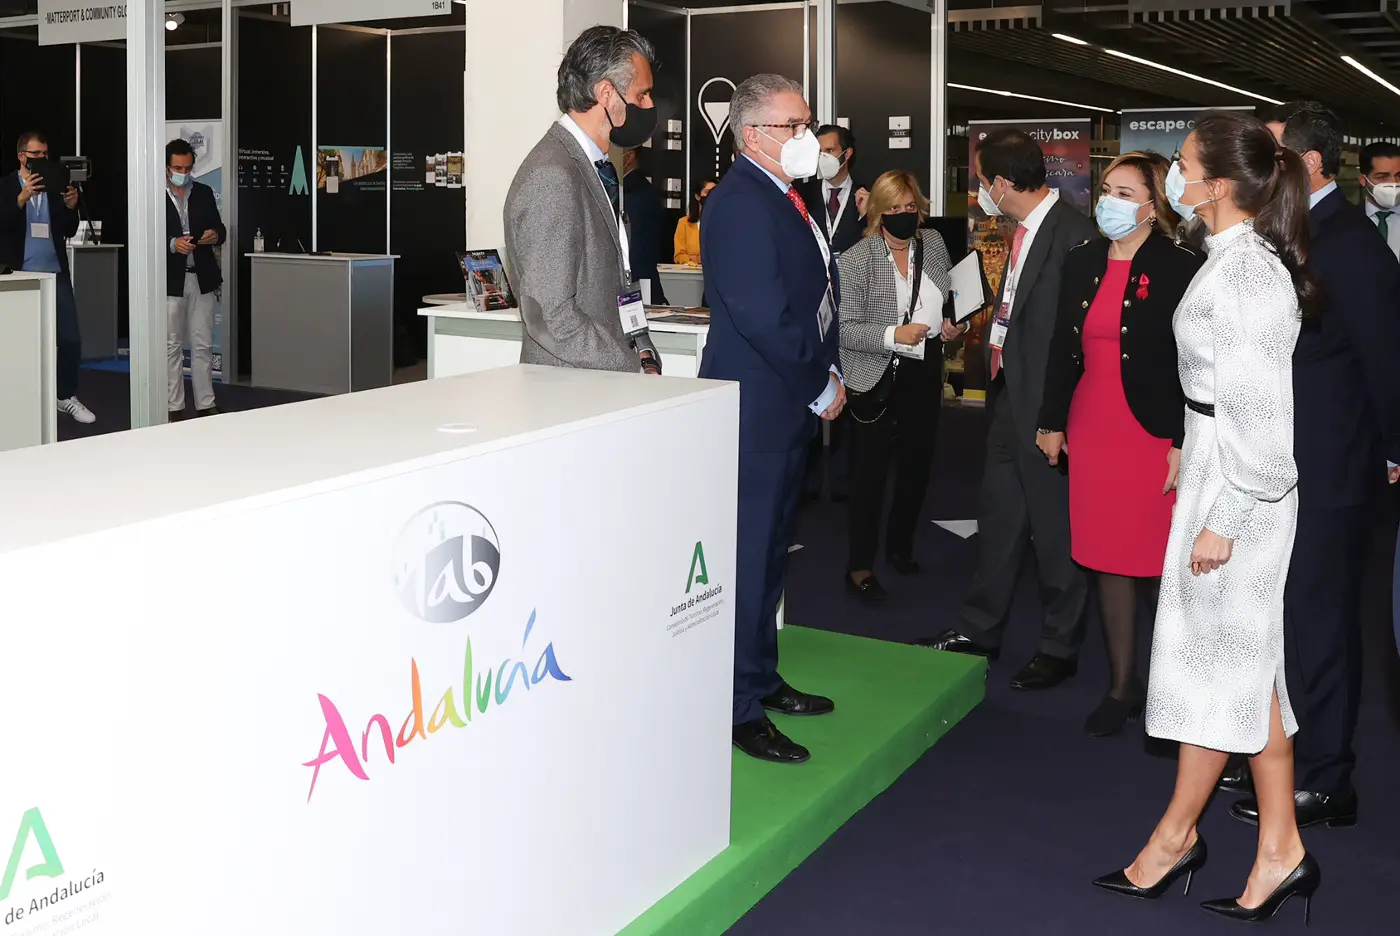 Queen Letizia of Spain attended Tourism Summit in Seville